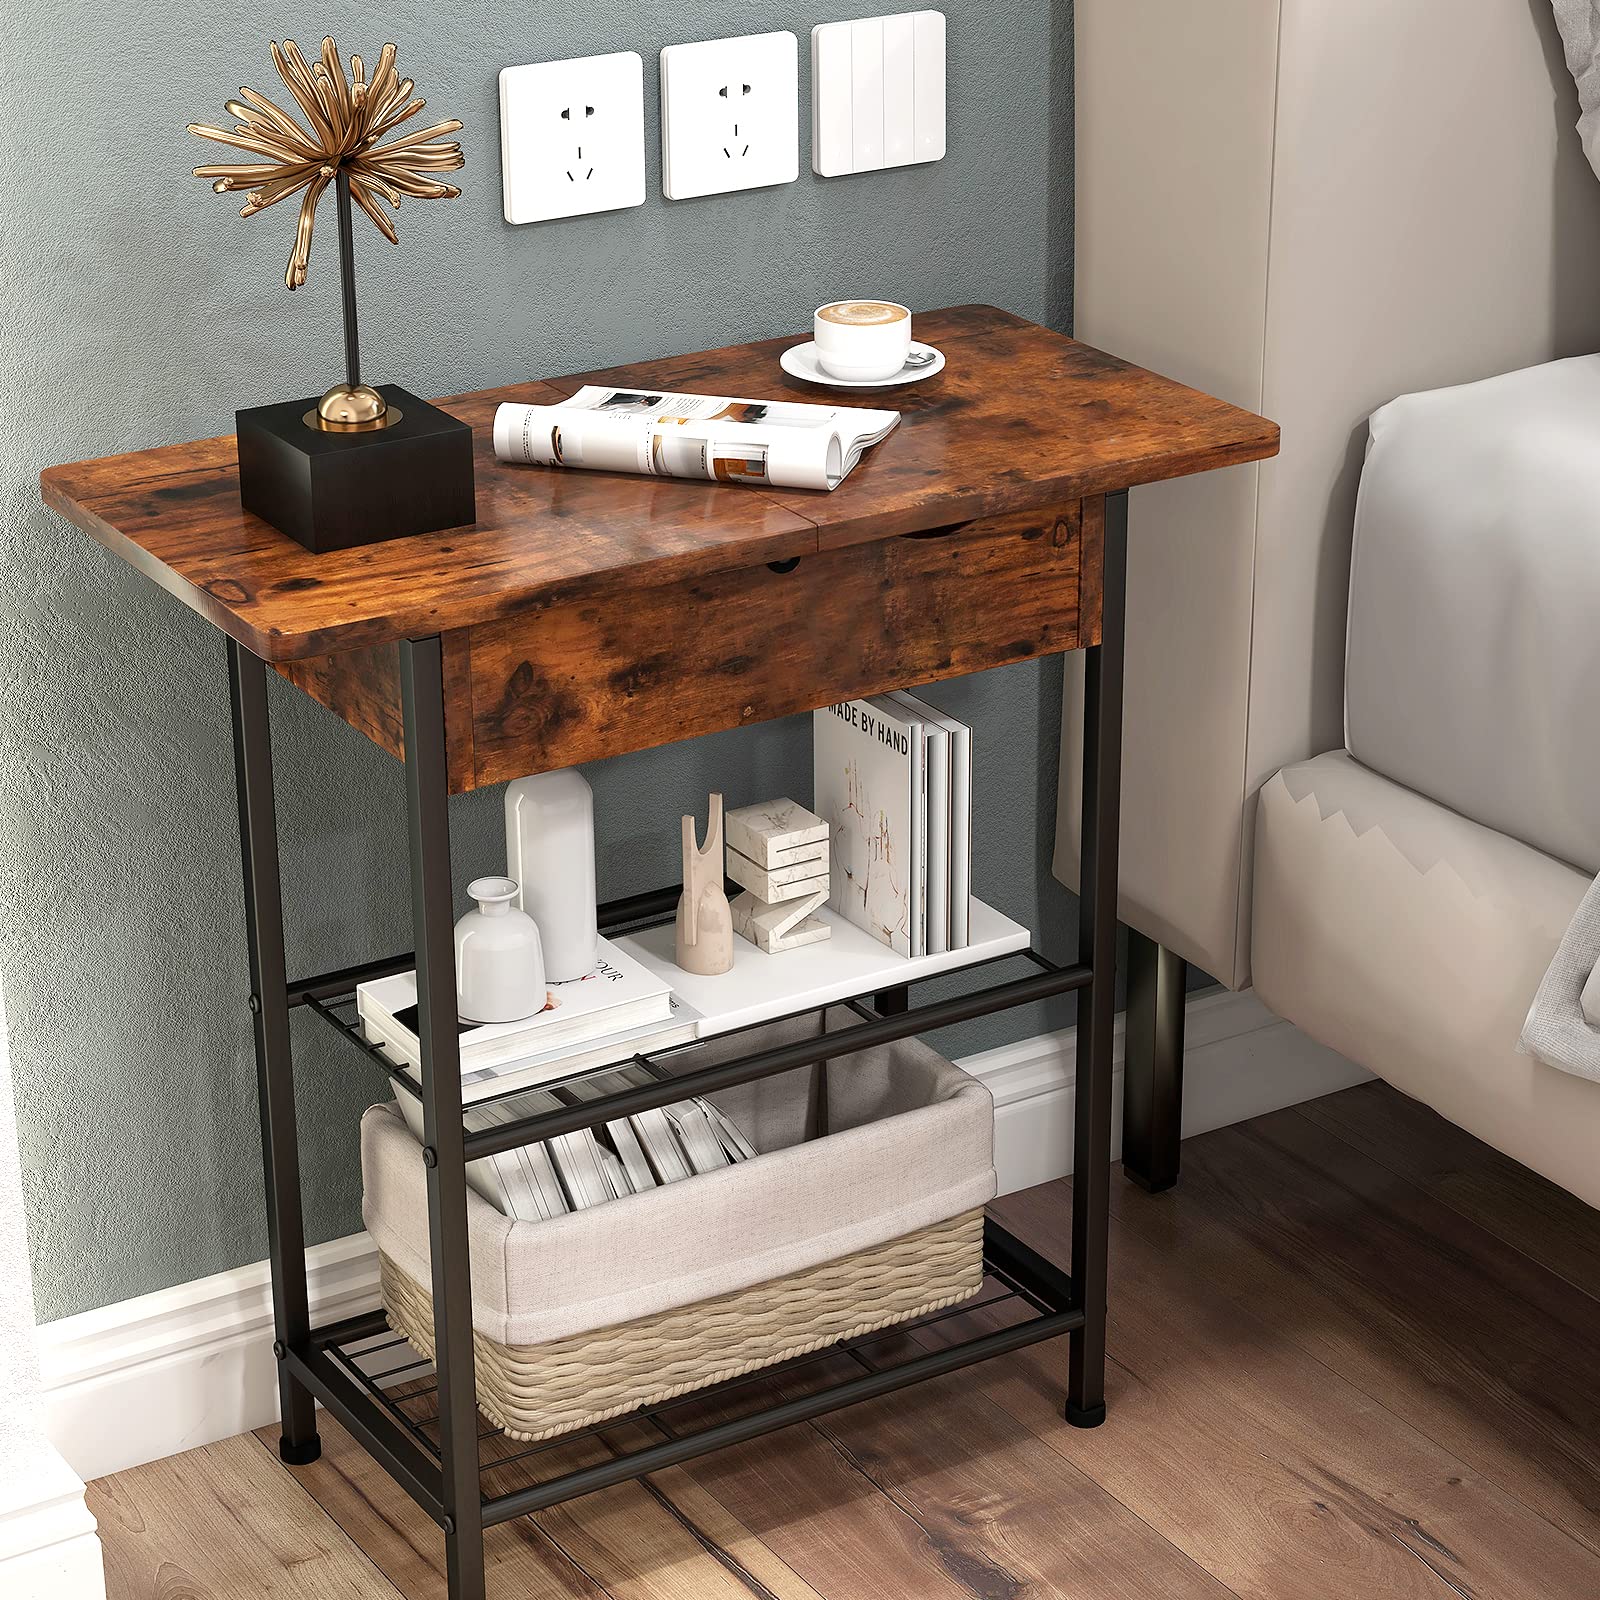 Giantex Side End Table for Small Space, Nightstand with Charging Station, 2 AC Outlets, 2 USB Ports & Adjustable Pads